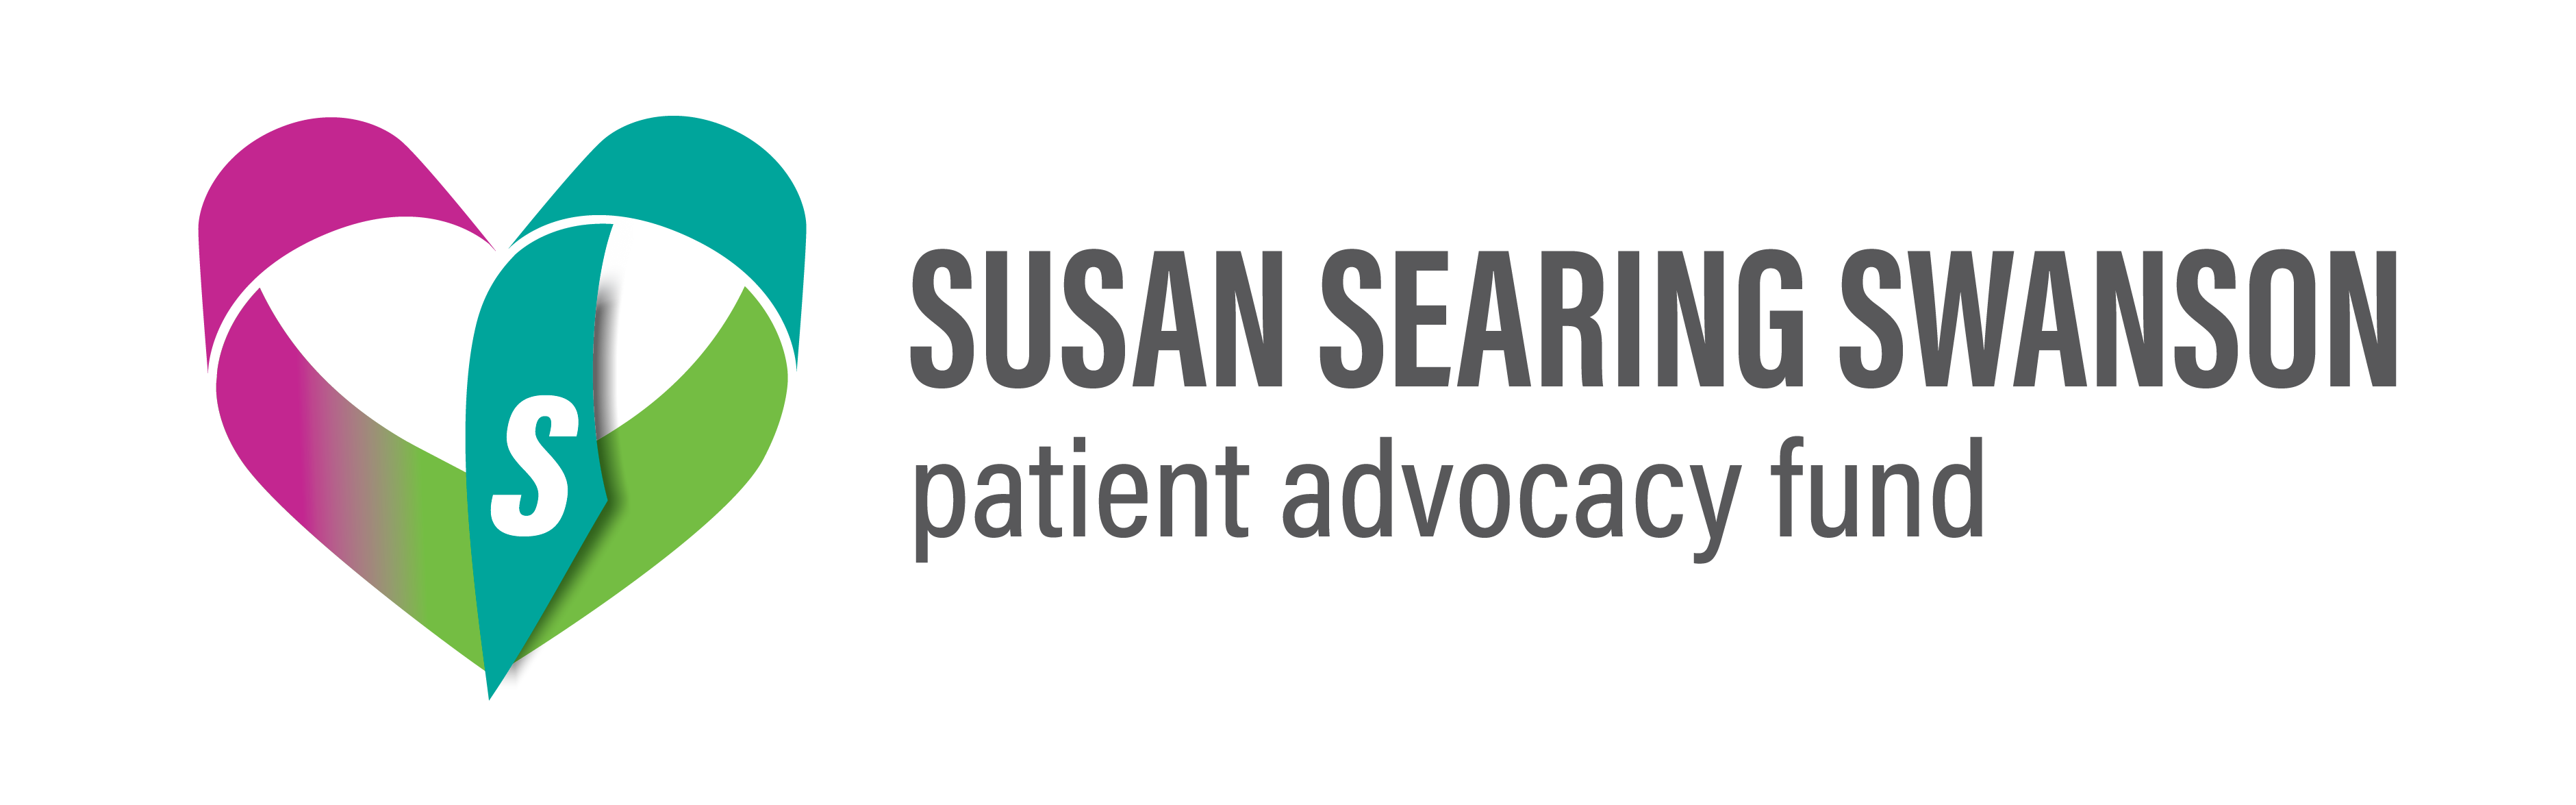 Susan Searing Swanson Patient Advocacy Fund logo